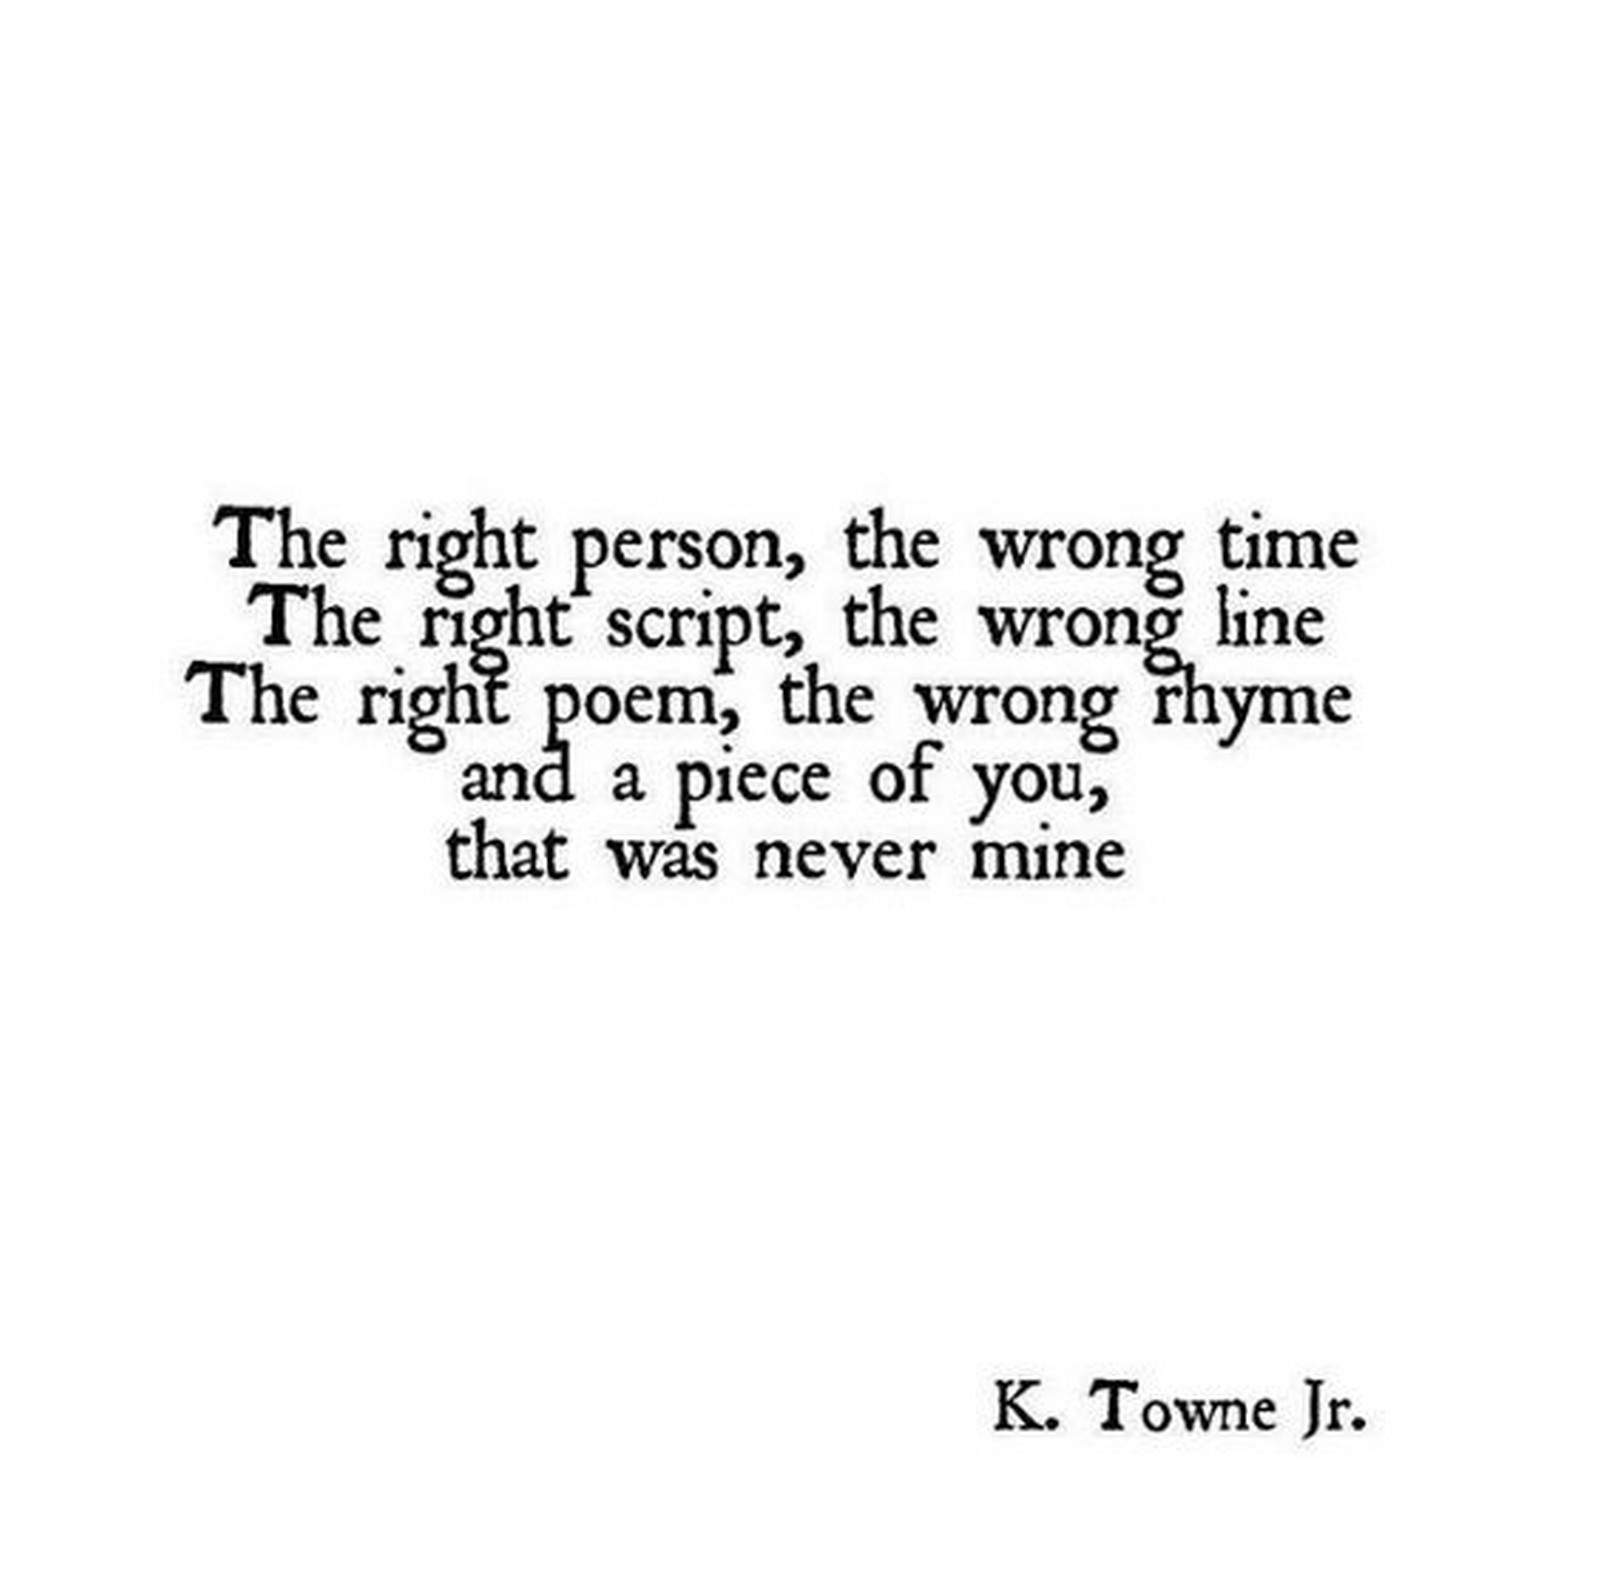 55 Romantic Quotes - "The right person, the wrong time. The right script, the wrong line. The right poem, the wrong rhyme and a piece of you, that was never mine."